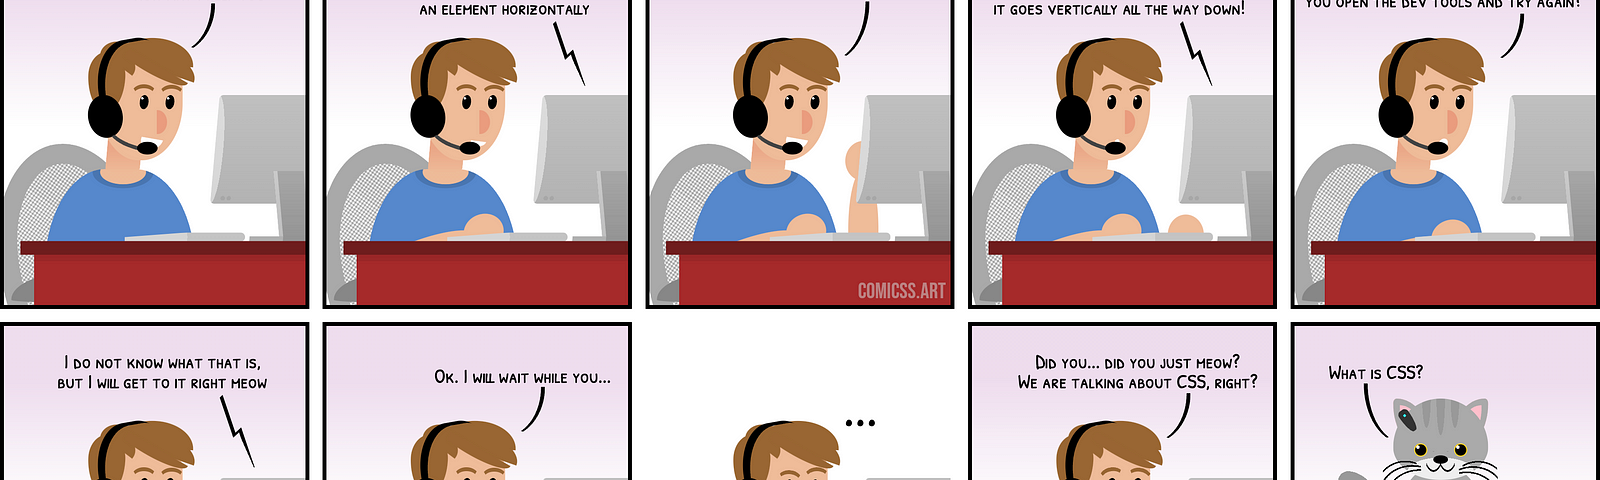 Cartoon of a person wearing a headset in front of a computer, replyng to a phone call. The conversation is about how the caller is having issues when translating an element horizontally, it moves fine, then drops to the bottom rapidly. The technical support person asks the caller to open the dev tools and look for other animations. The caller replies ‘I will do it right meow’ shocking the technical support, who asks ‘are we talking about CSS?’ The last panel is a drawing of a cat pushing a glas